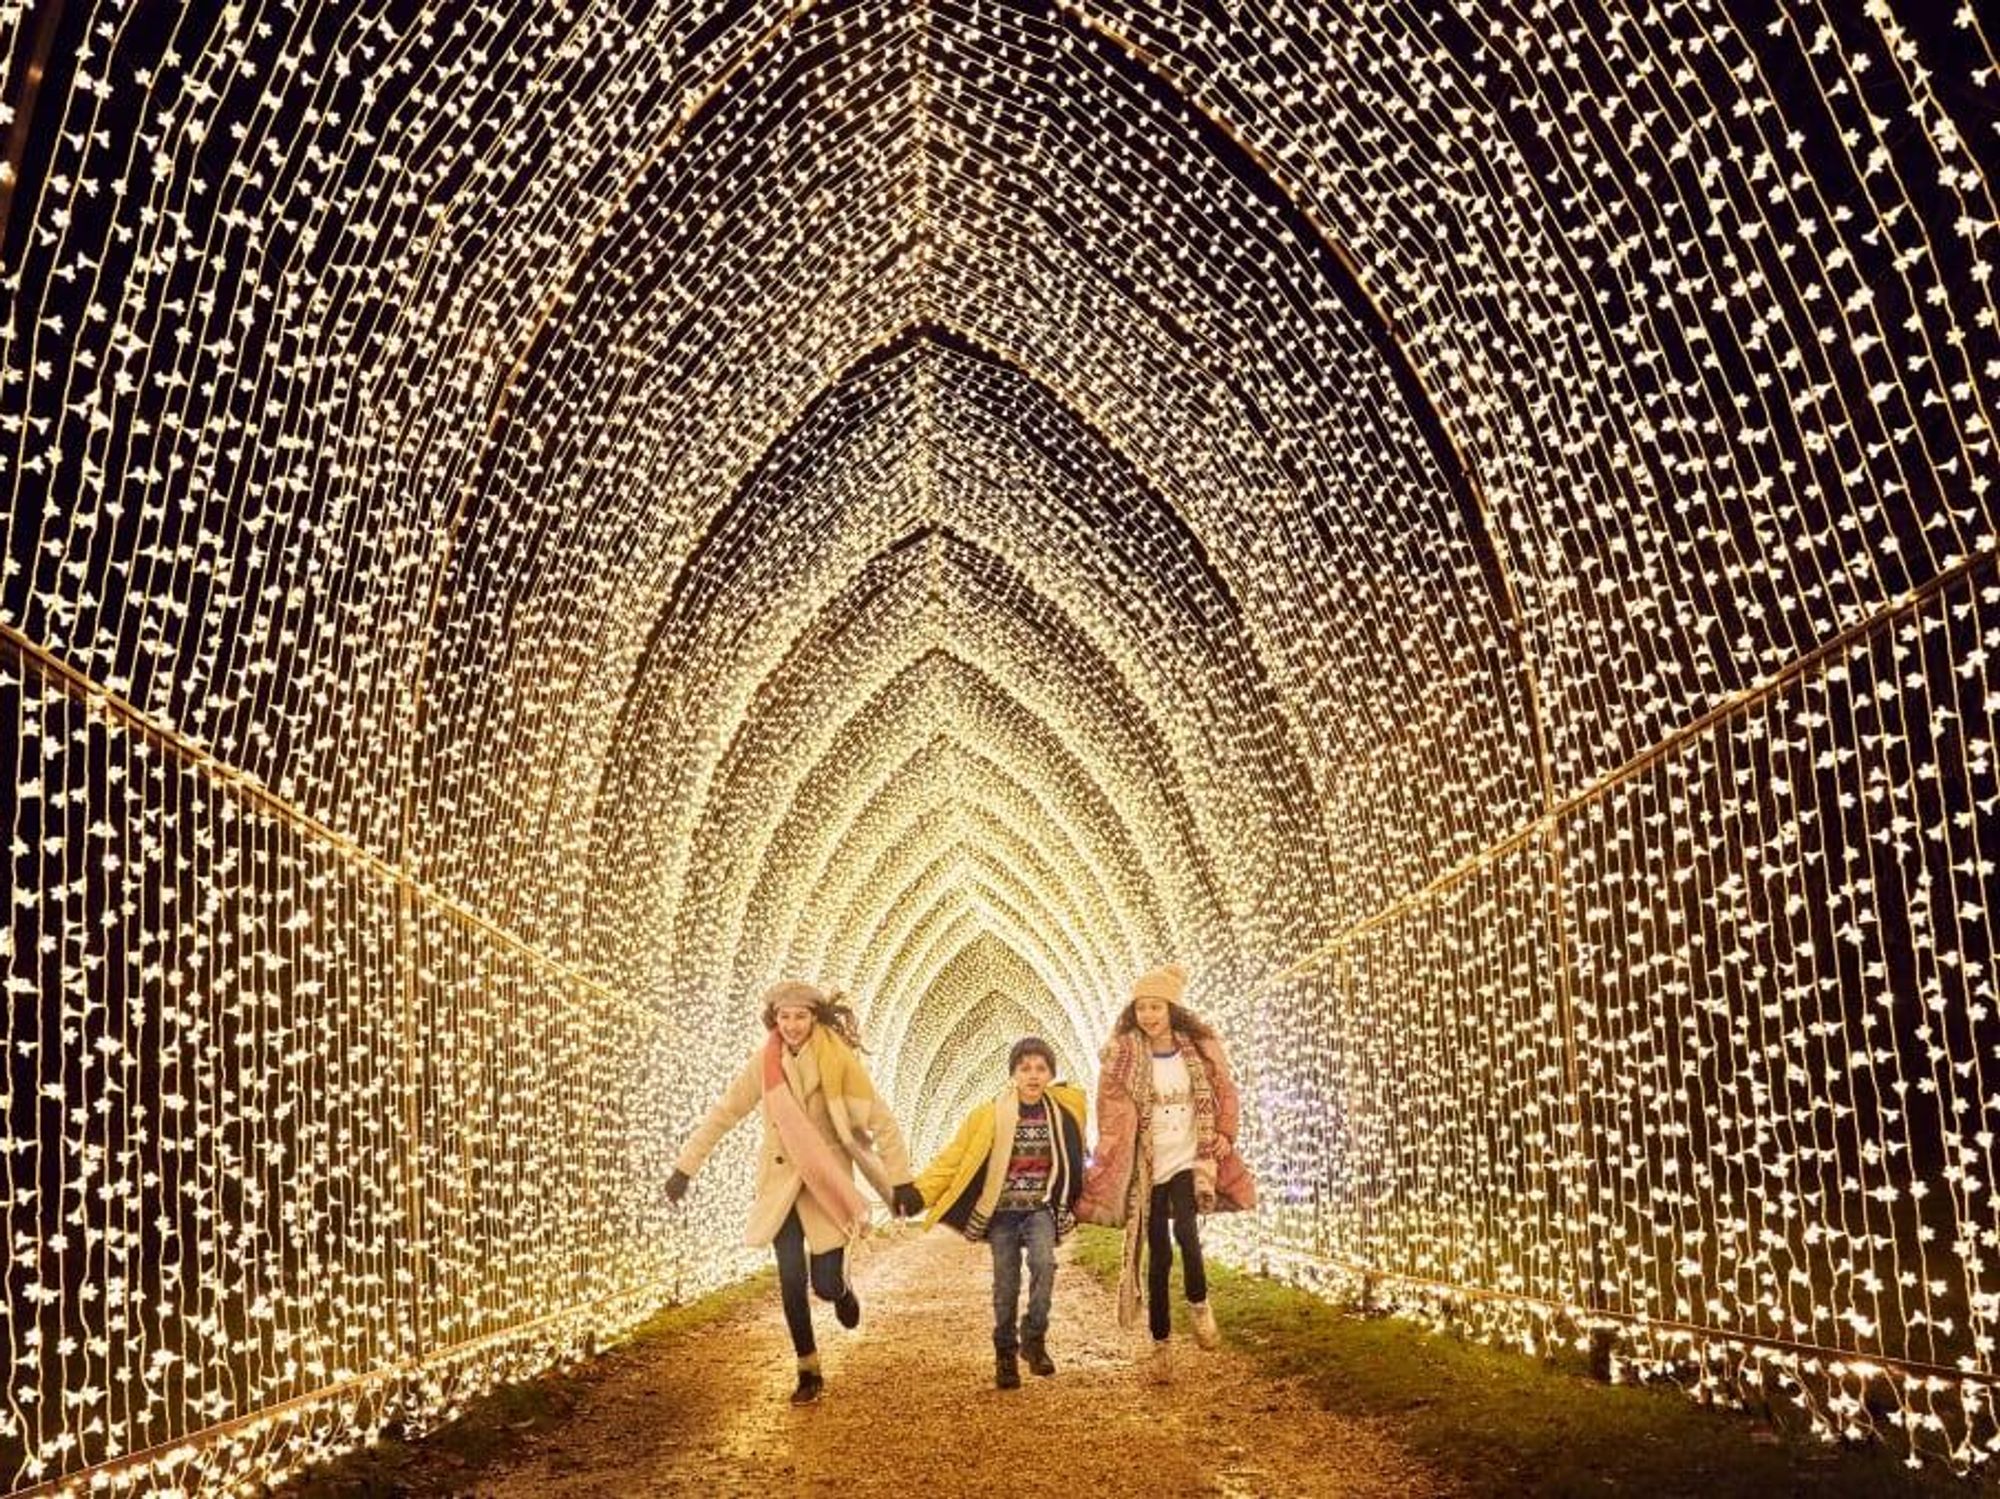 Walk through 1 million holiday lights in spectacular 'Lightscape' coming to  Fort Worth - CultureMap Fort Worth